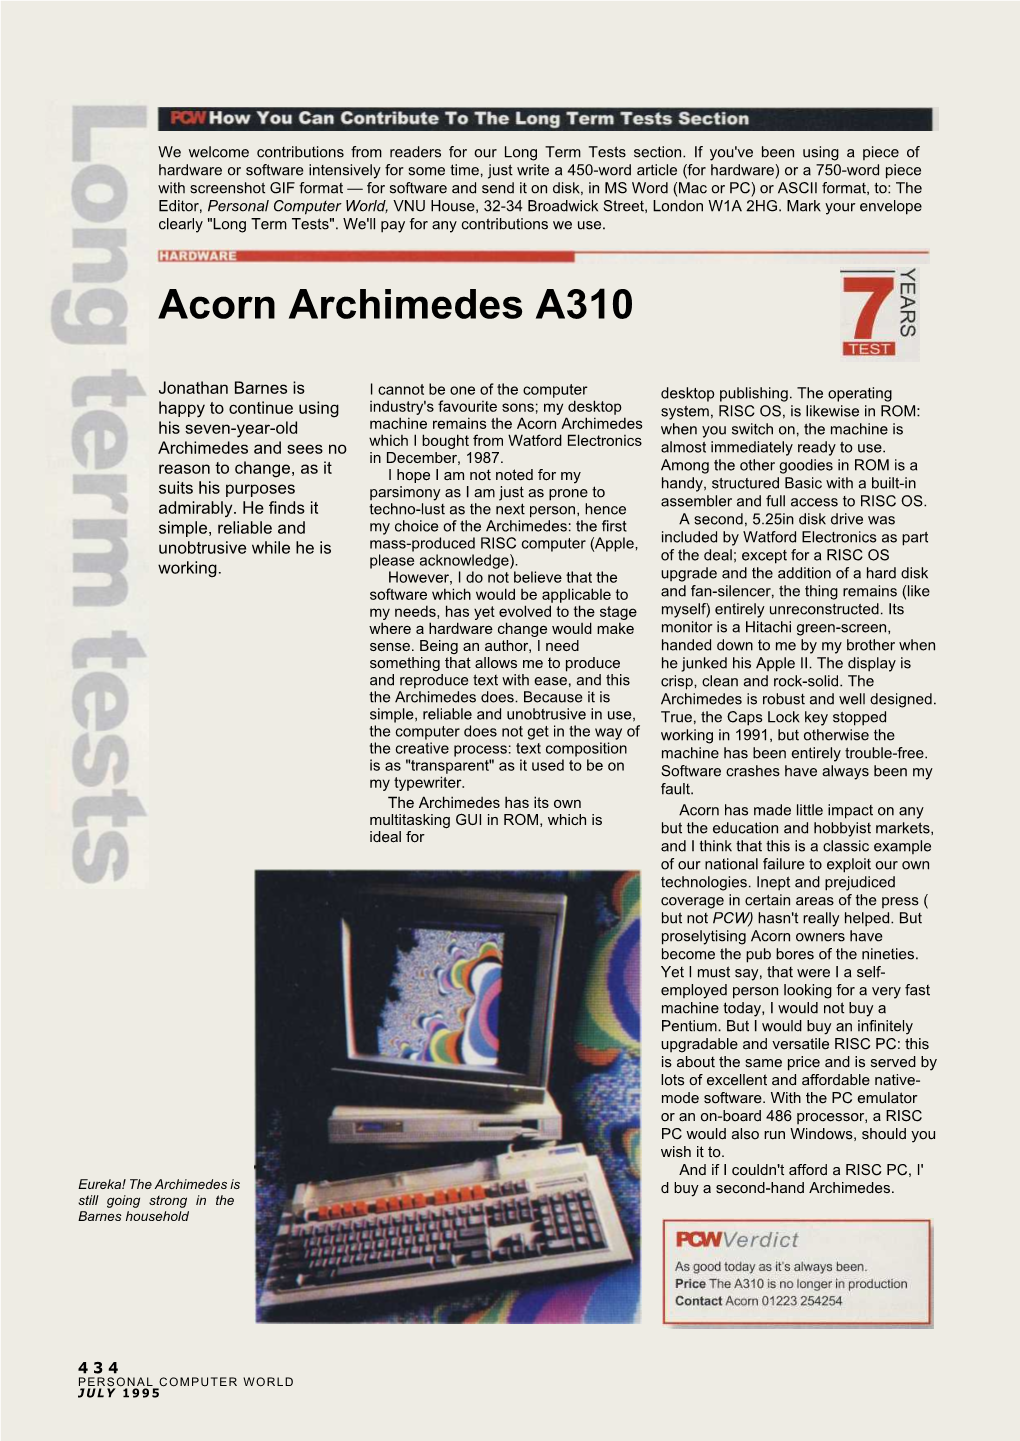 Acorn Archimedes A310